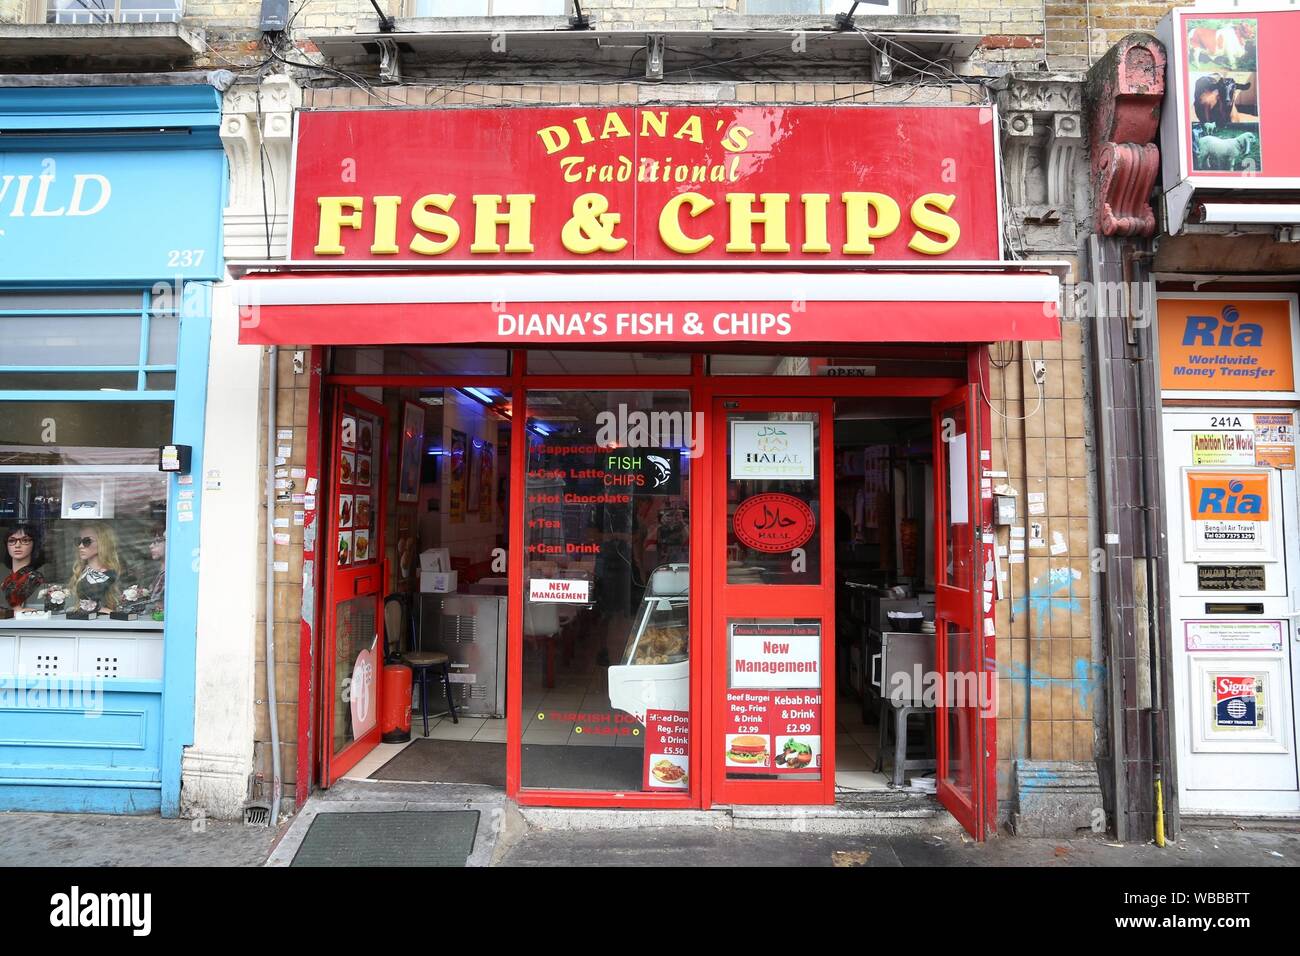 LONDON, UK - JULY 7, 2016: Diana's traditional fish and chips restaurant in London. Fish and chips is a famous British meal. Stock Photo